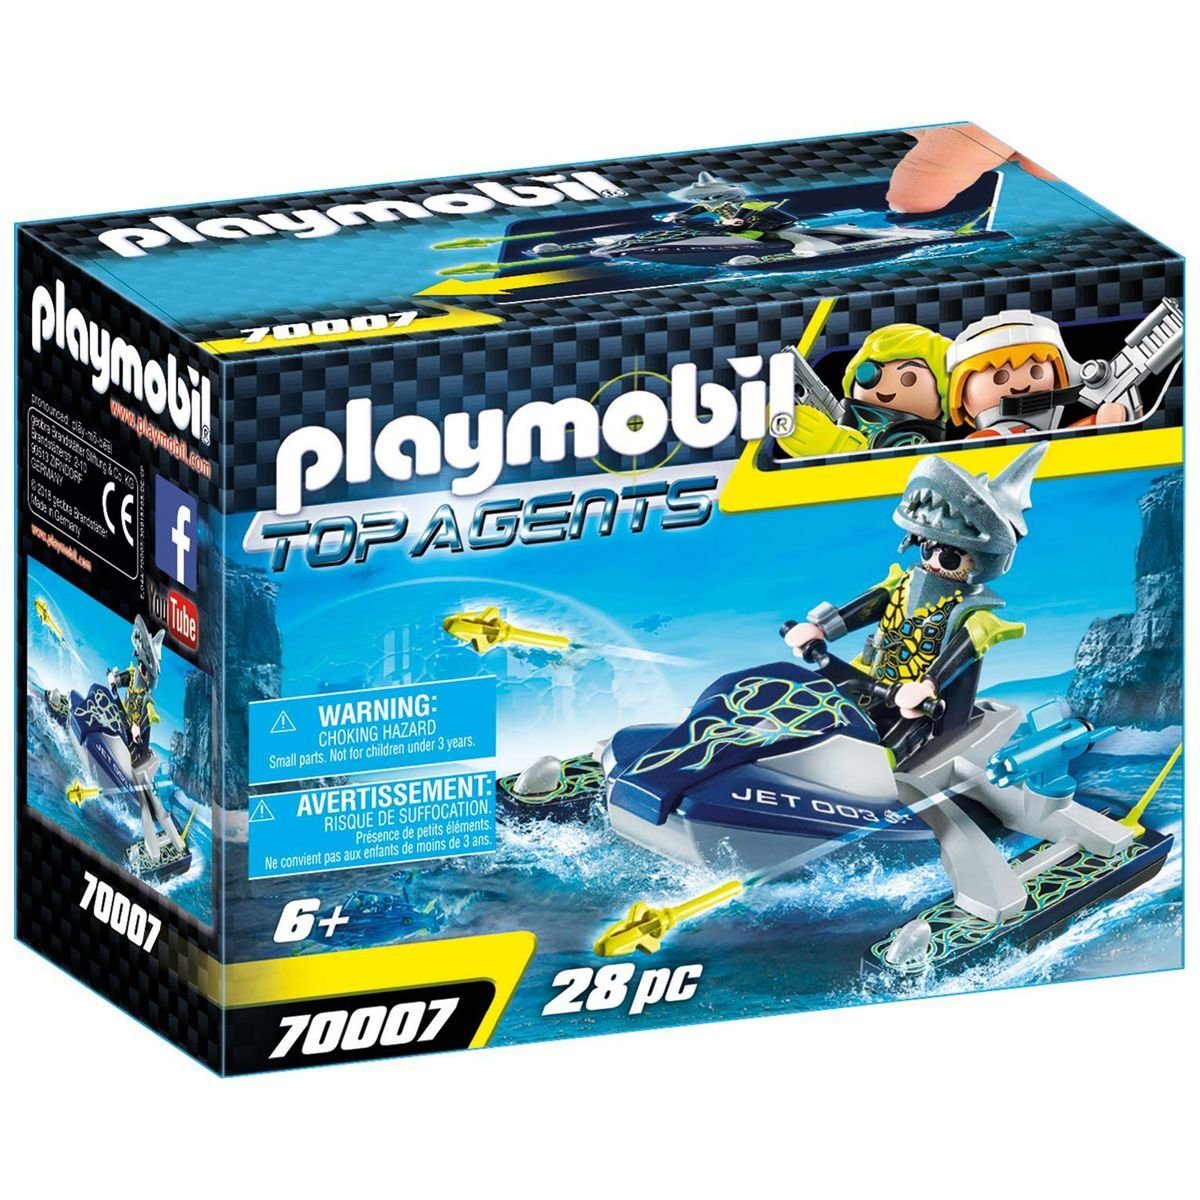 Playmobil® Spielzeug-Boot PLAYMOBIL® 70007 - Top Agents - Team S.H.A.R.K.  Rocket Rafter